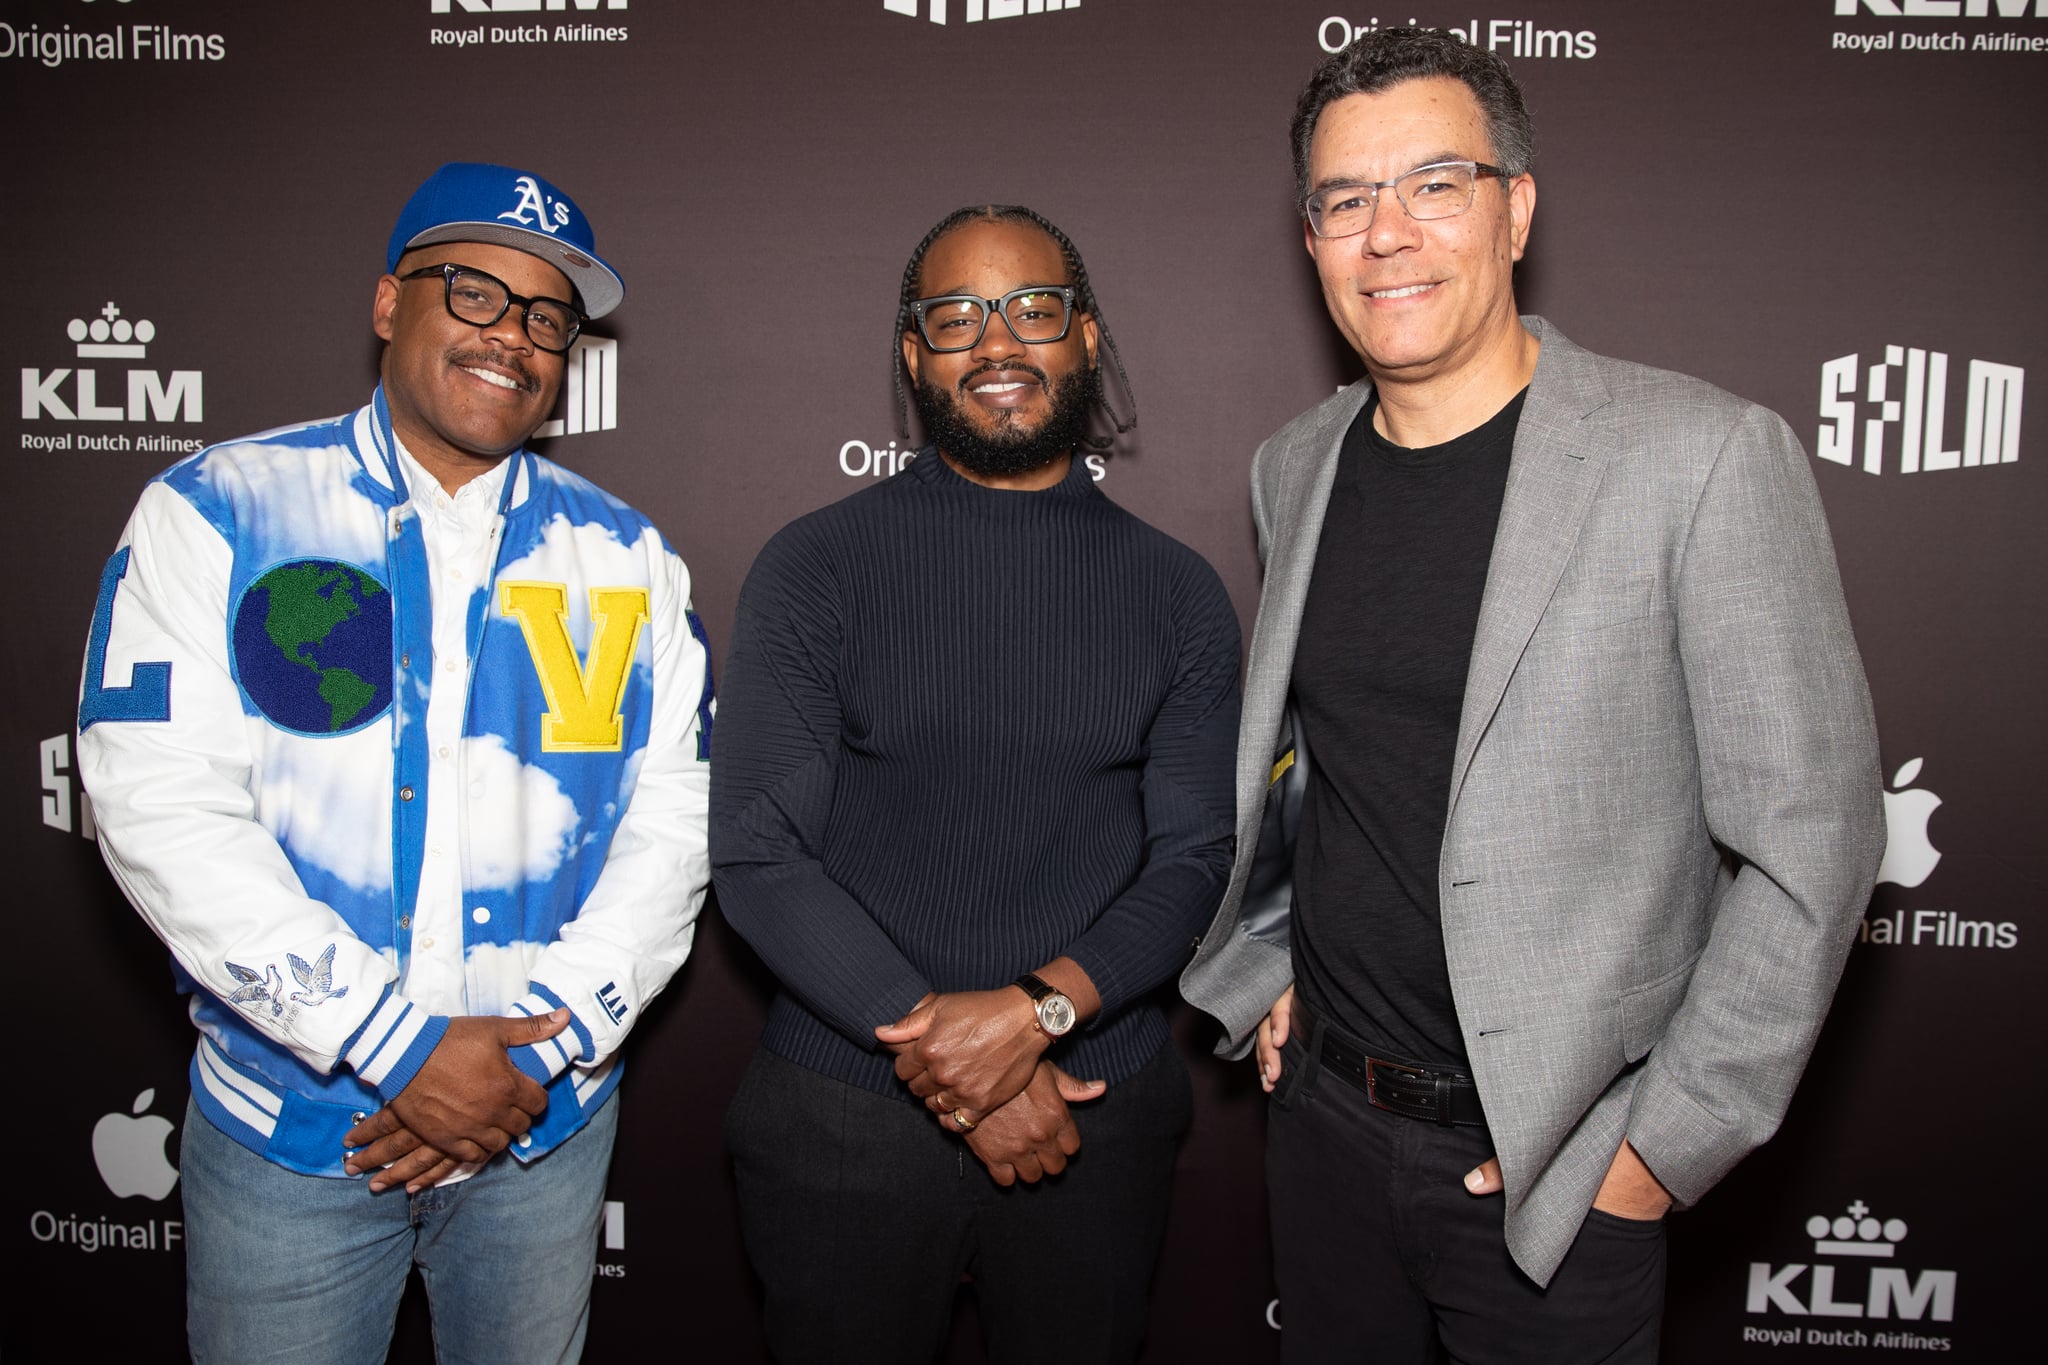 OAKLAND, CALIFORNIA - APRIL 13: (L-R) Producers Eric Peyton, Ryan Coogler and director Peter Nicks arrive at the opening night premiere of 